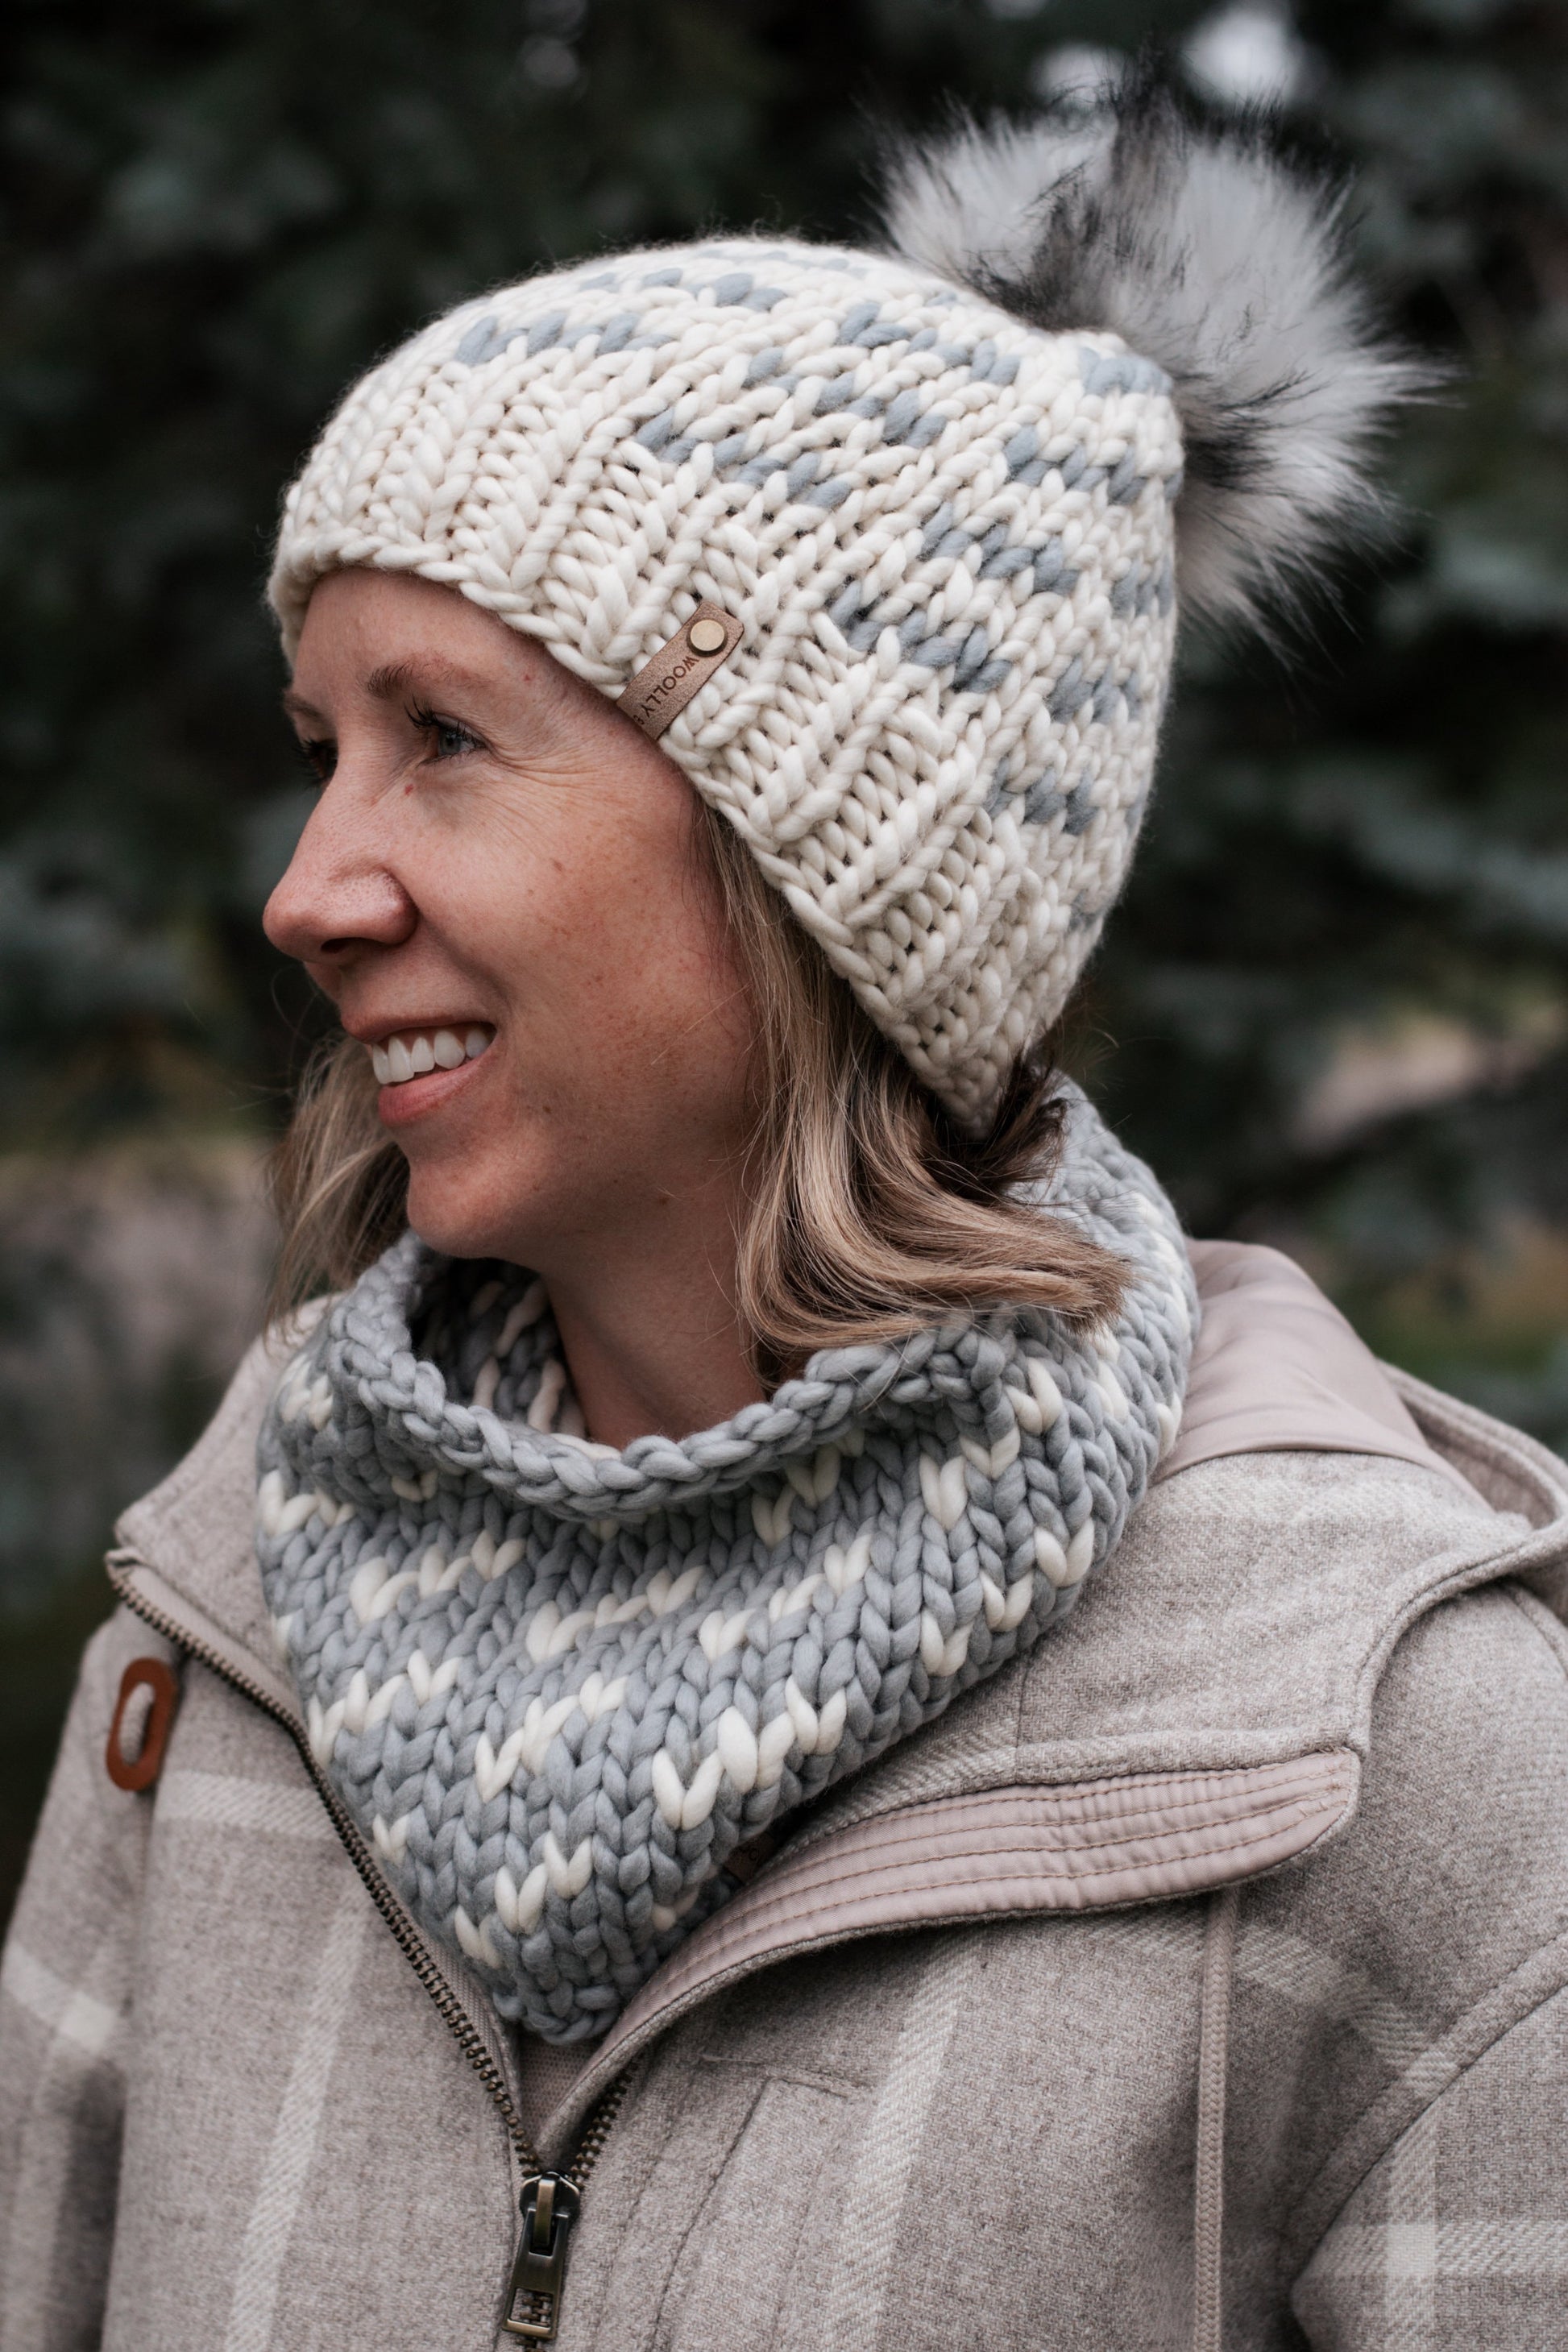 KNITTING PATTERN: Migrations Beanie